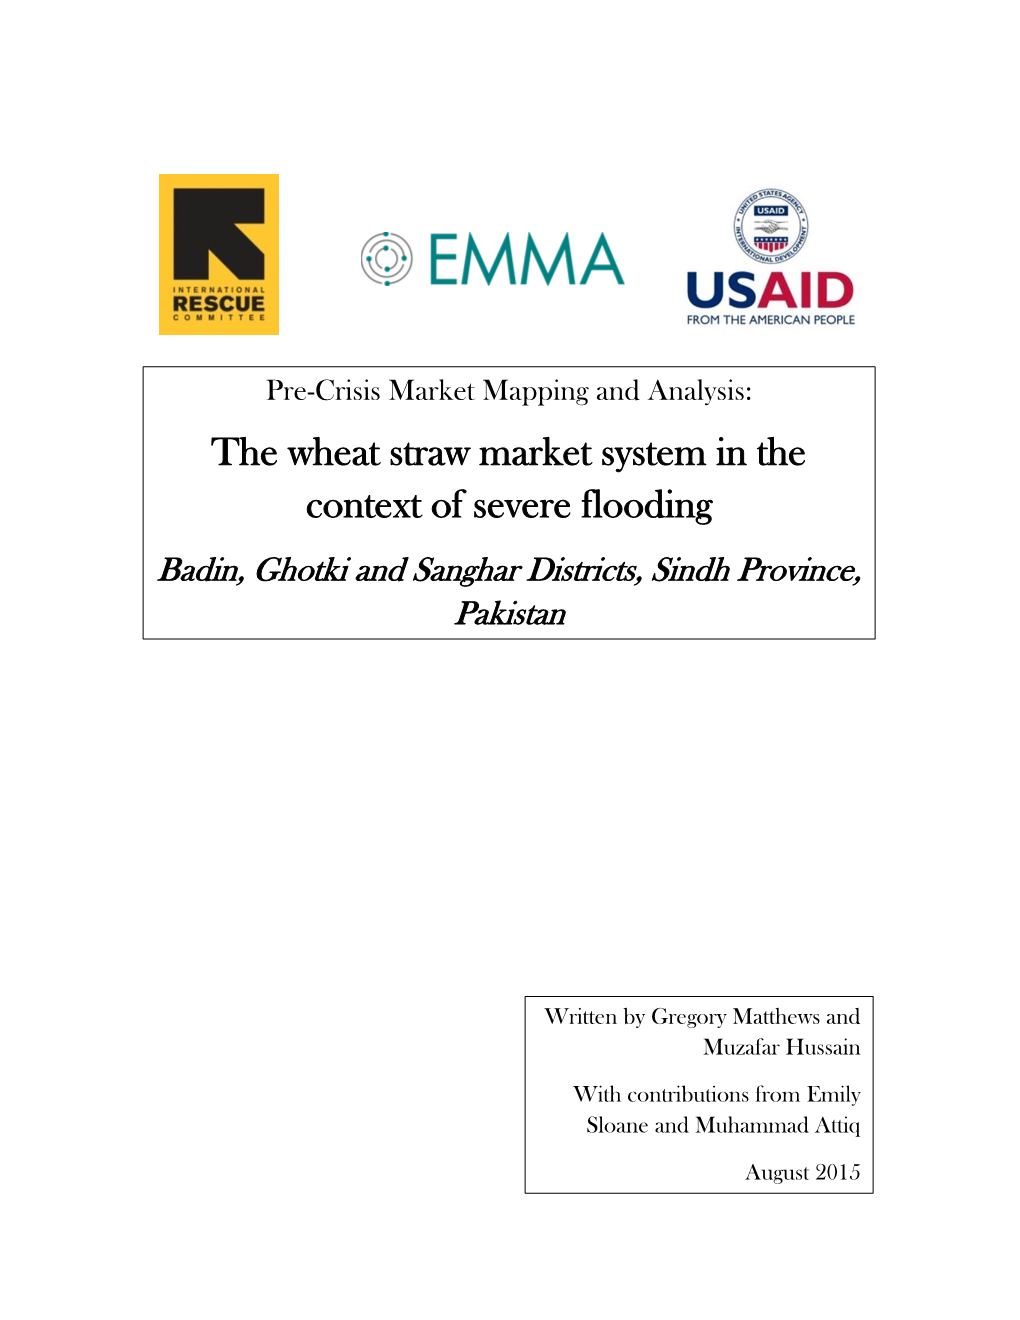 The Wheat Straw Market System in the Context of Severe Flooding Badin, Ghotki and Sanghar Districts, Sindh Province, Pakistan